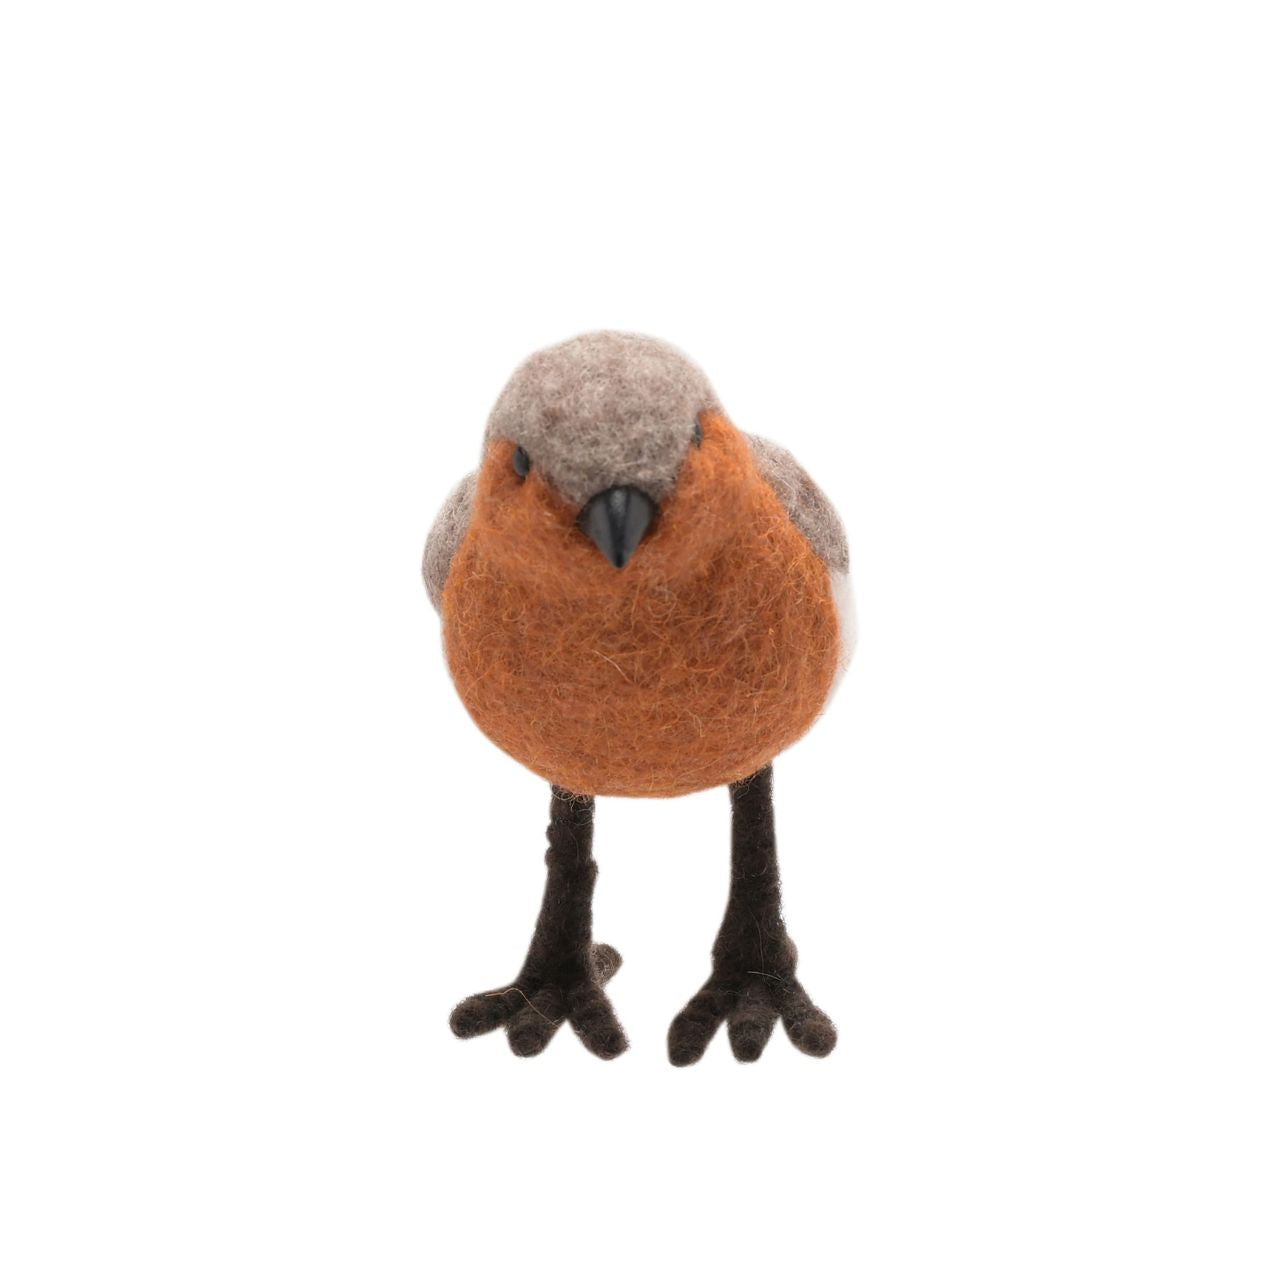 Robin Christmas Decoration - Felt  A felt robin decoration by THE SEASONAL GIFT CO.  This adorable decoration is brimming with traditional Christmas charm.